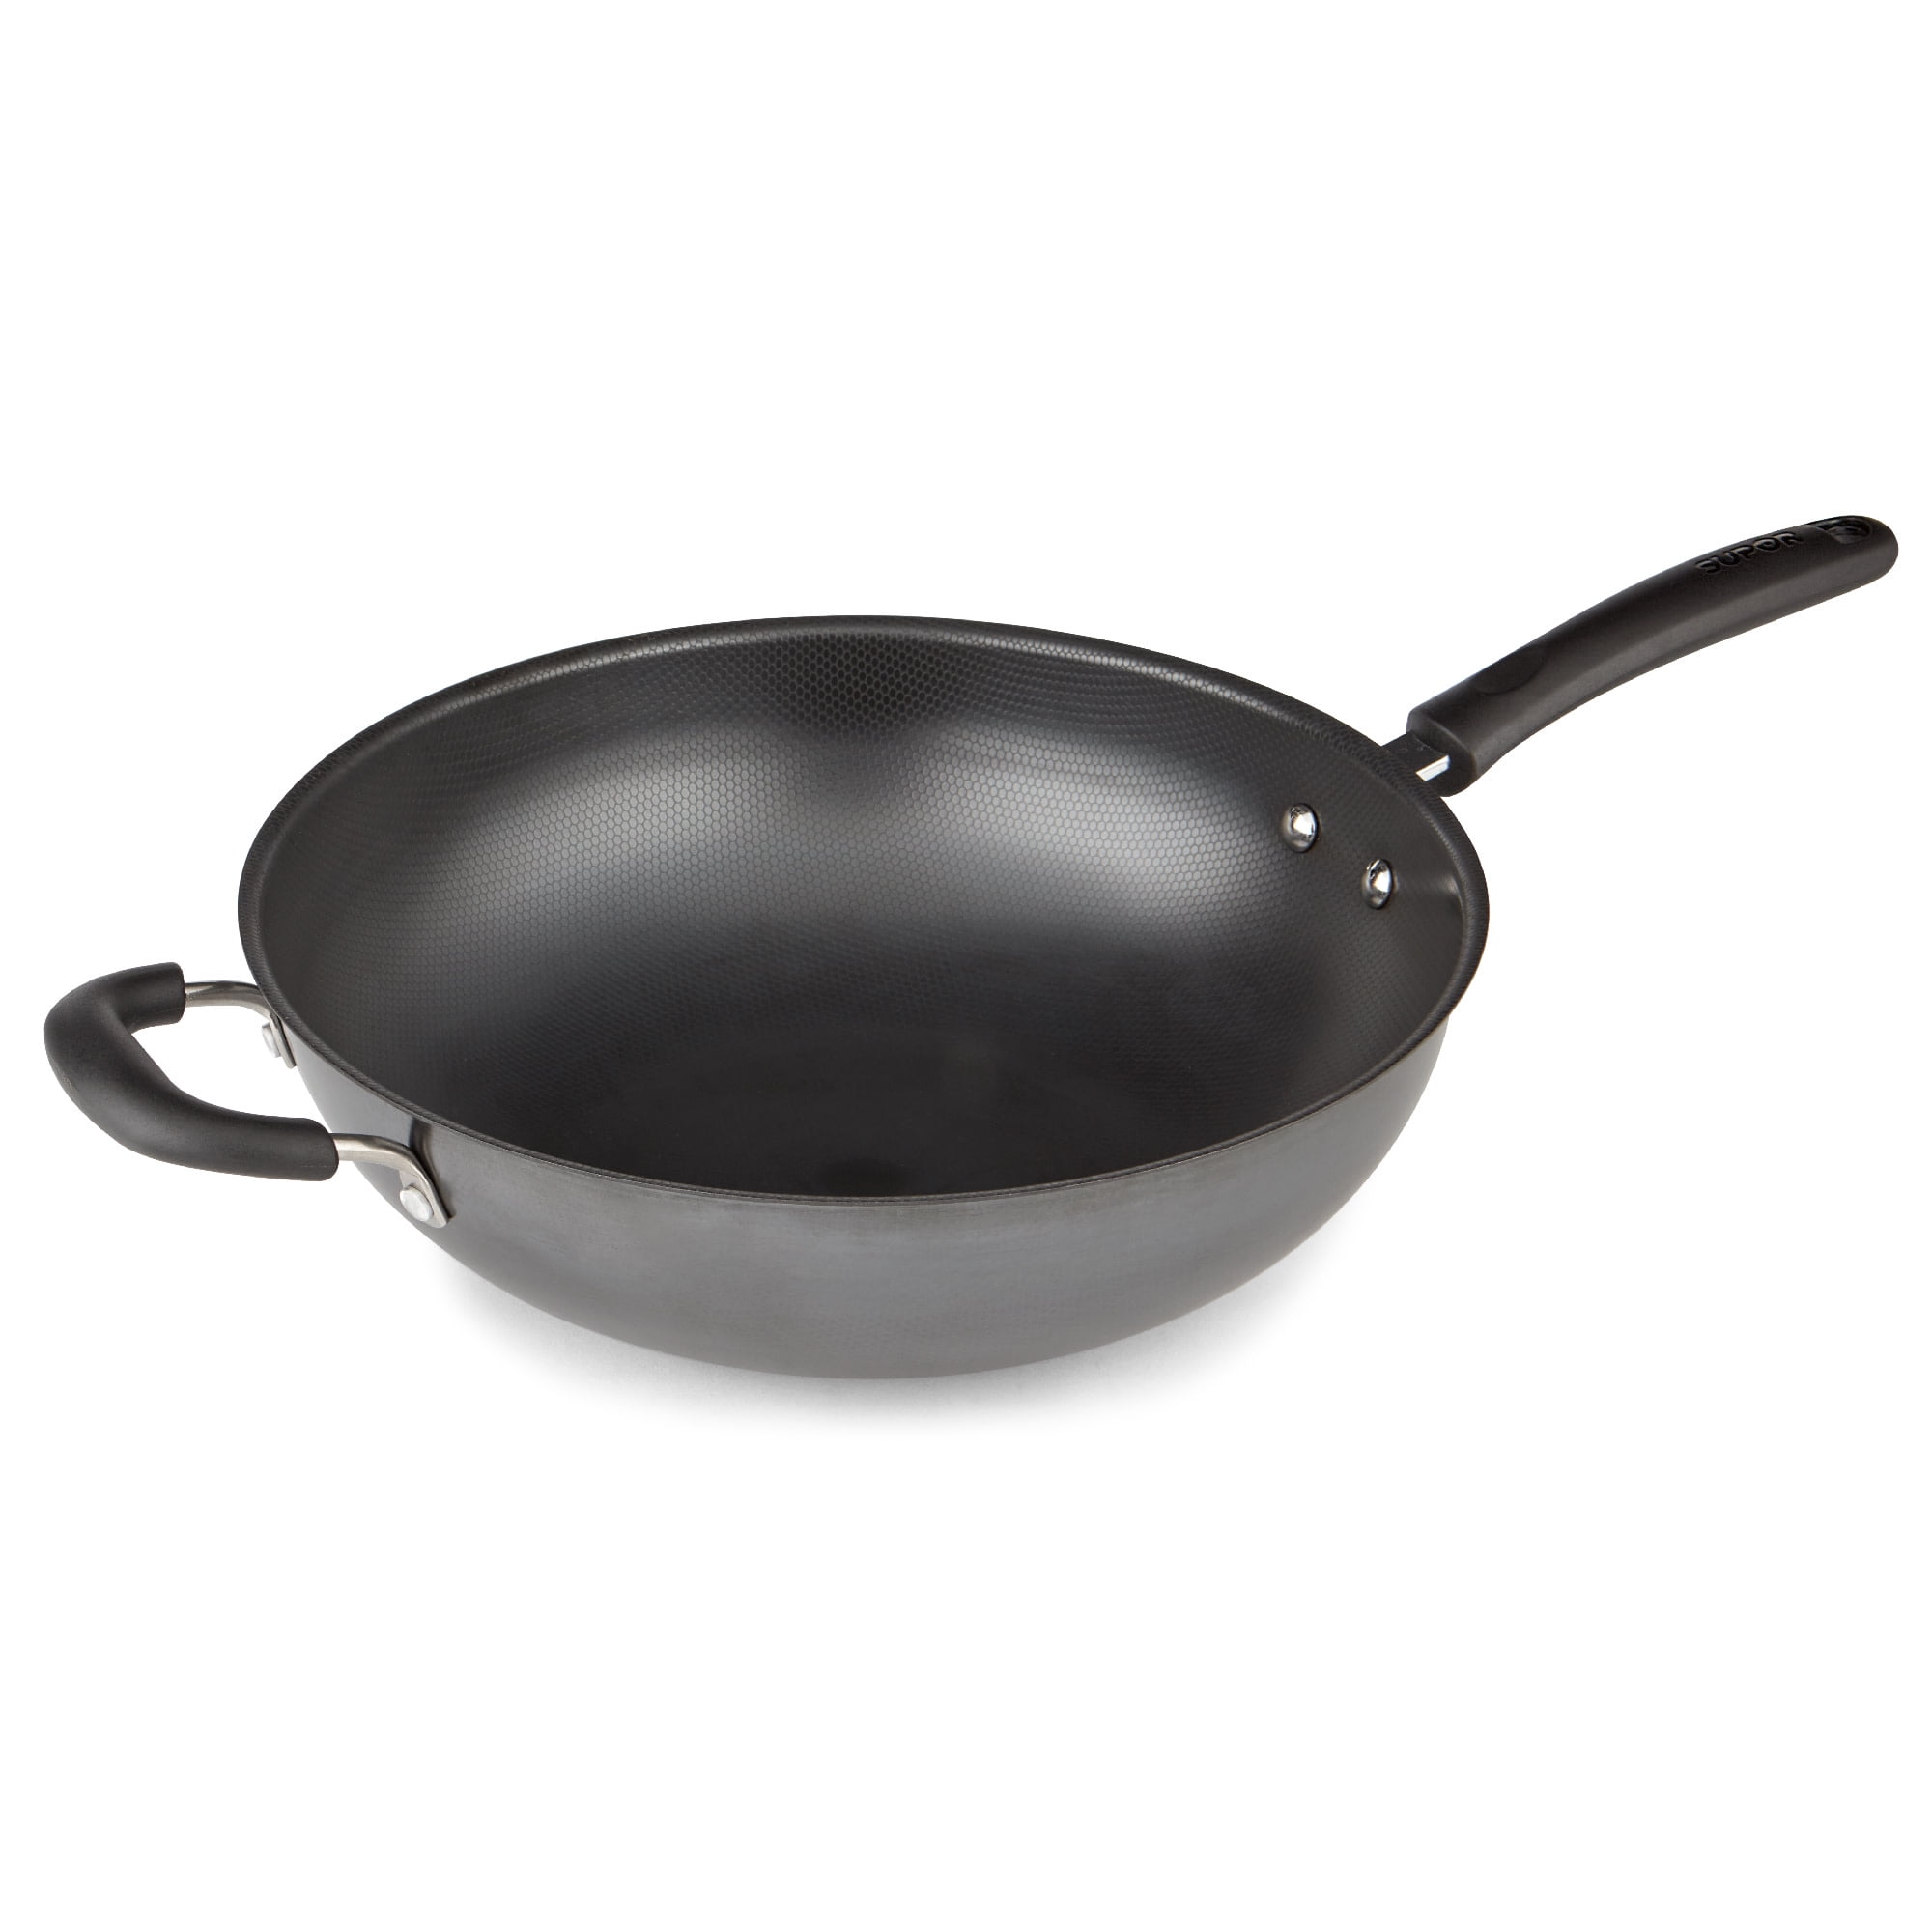 Town Food Service 34716 16" Hand Hammered Cantonese Wok for sale online 